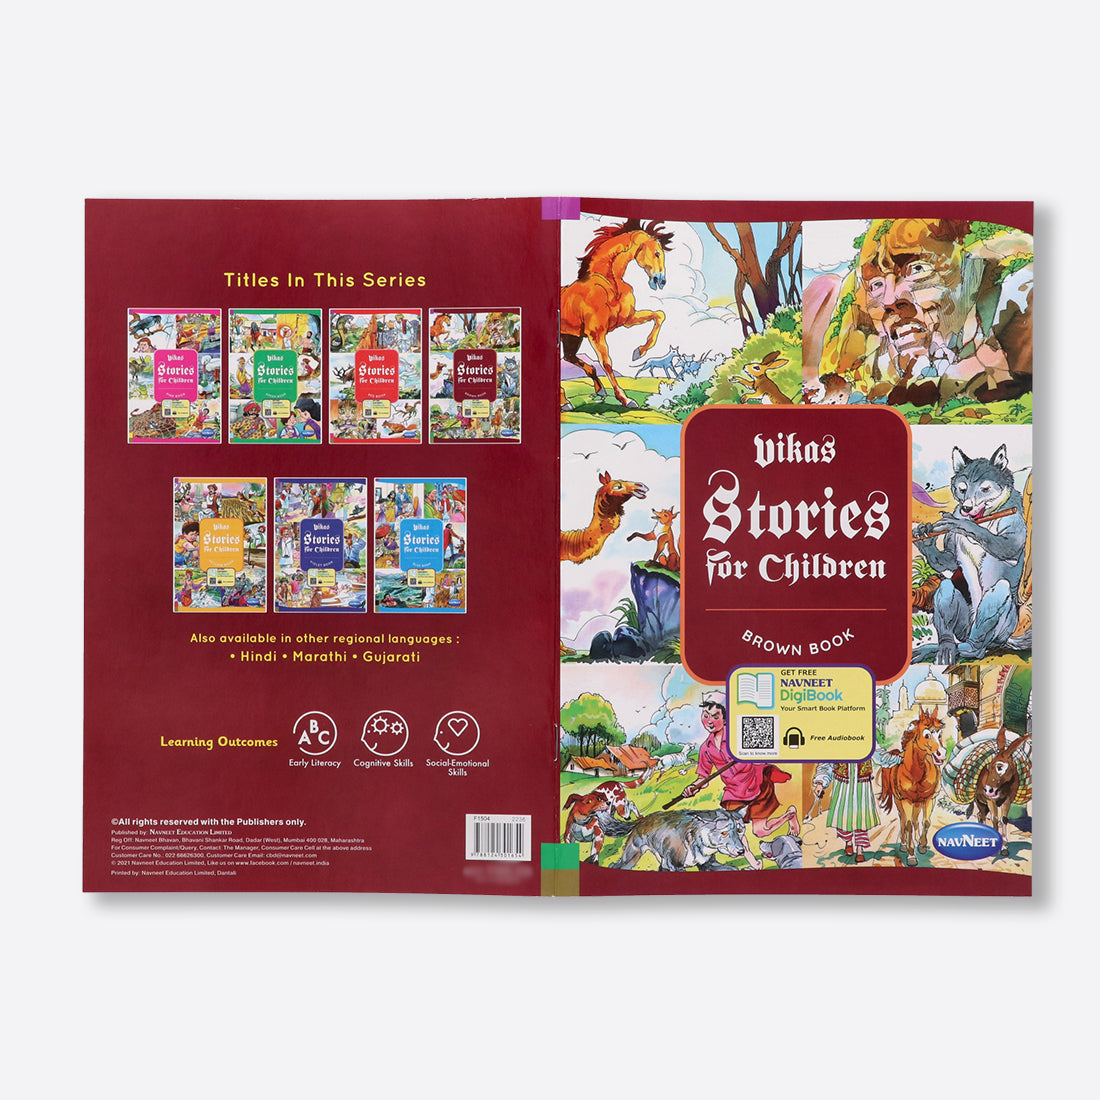 Navneet Stories For Children 7 books- With Colourful Illustrations - Read aloud stories - short classic stories with Morals - 85+ bedtime stories - Audio Book - Social-Emotional